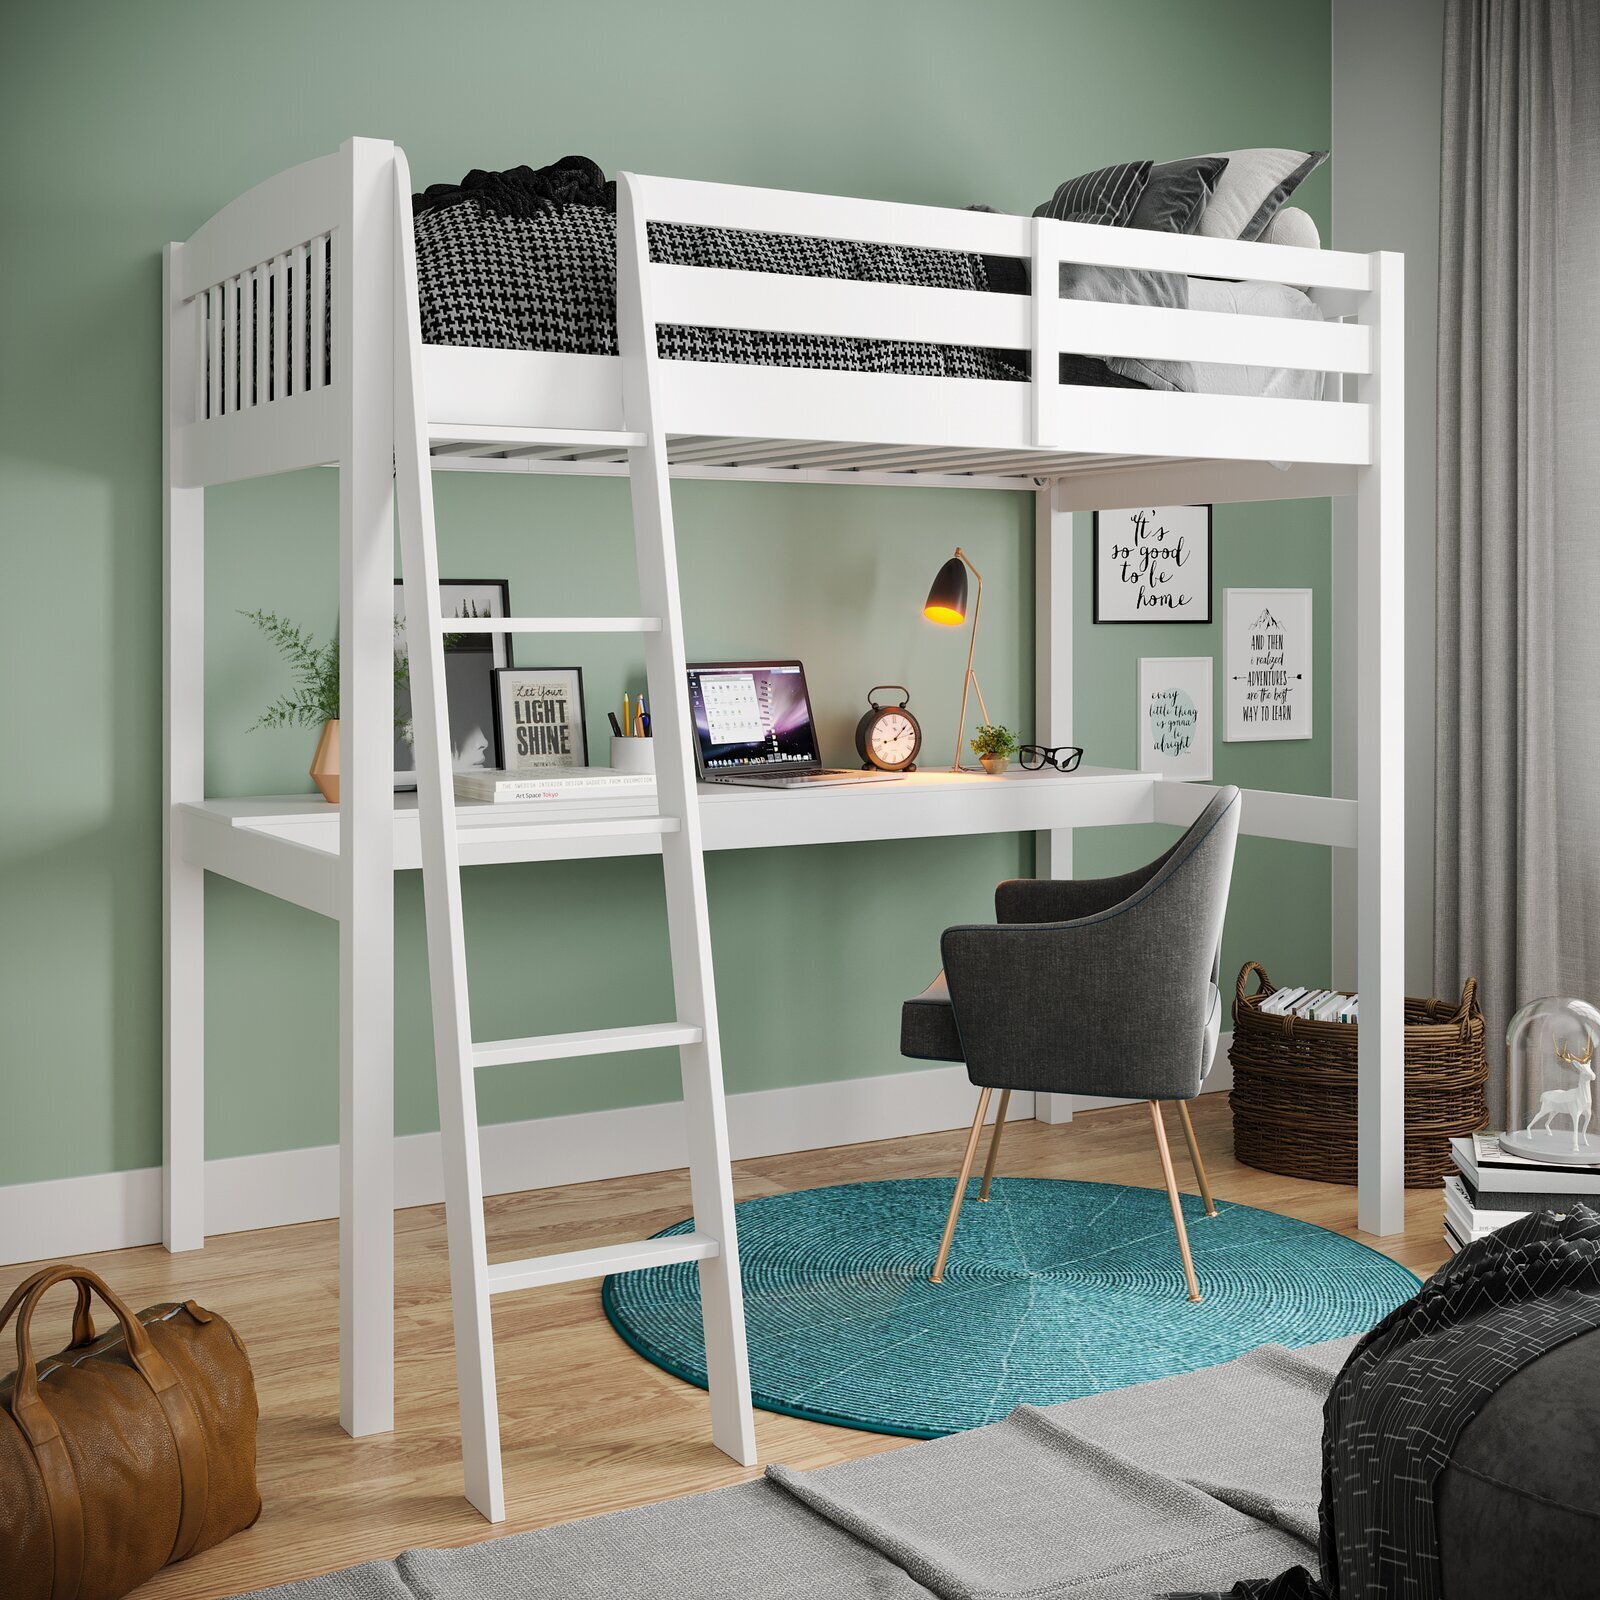 Minimalistic Wood Loft Bed with Desk and Storage